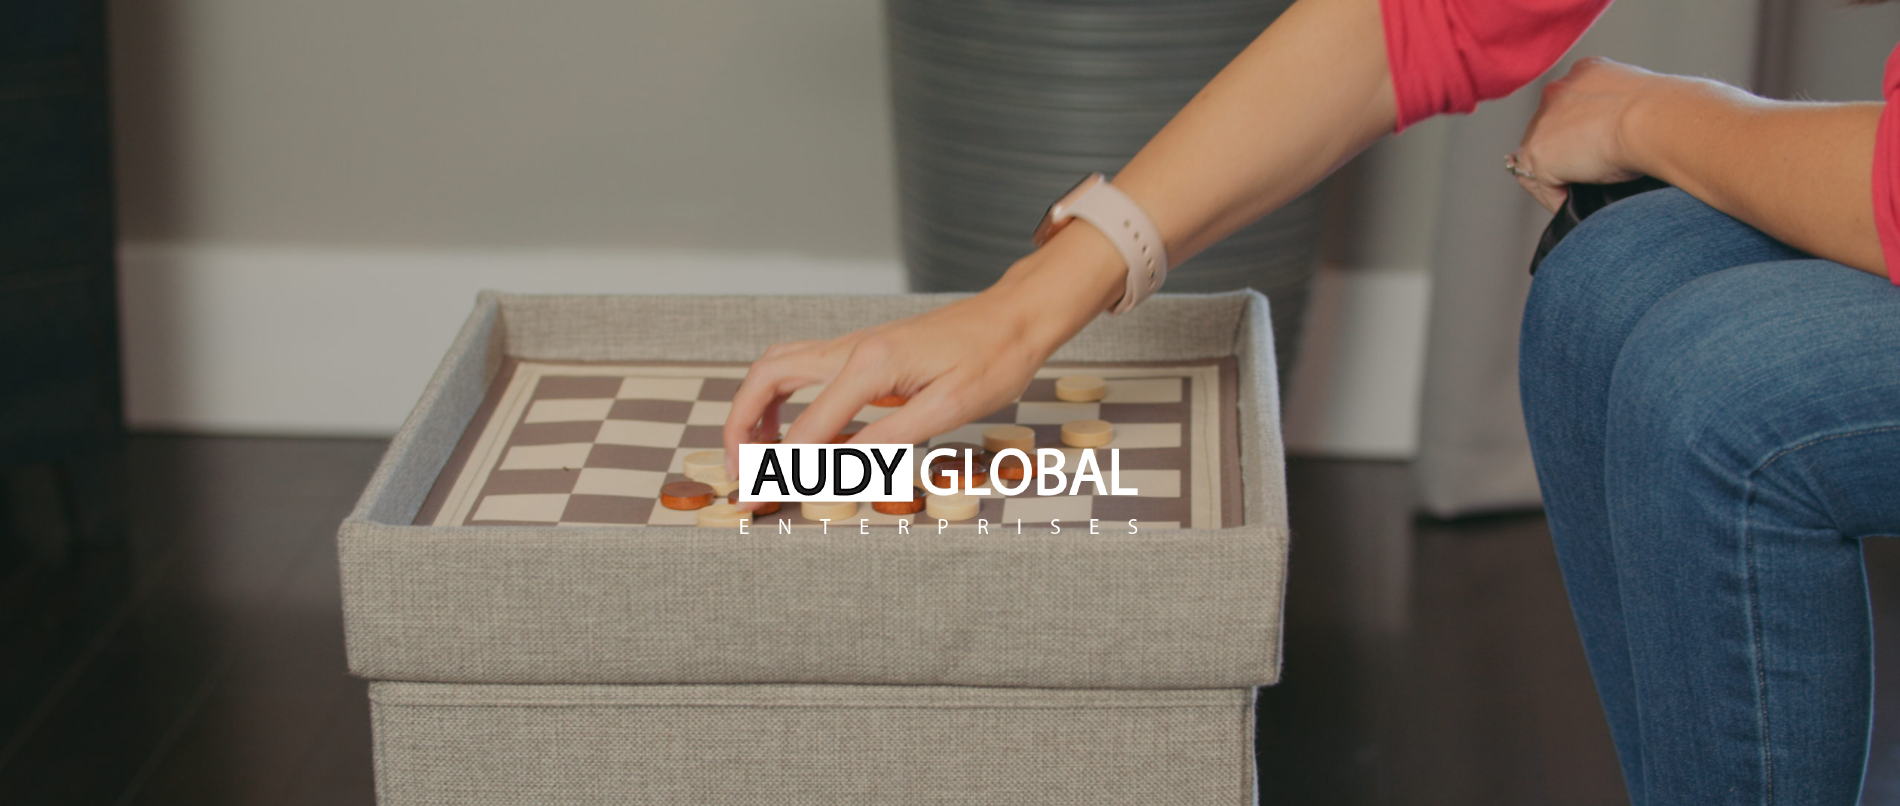 IU C&I Studios Page Audy Global Enterprises Logo on background side view of woman playing checkers